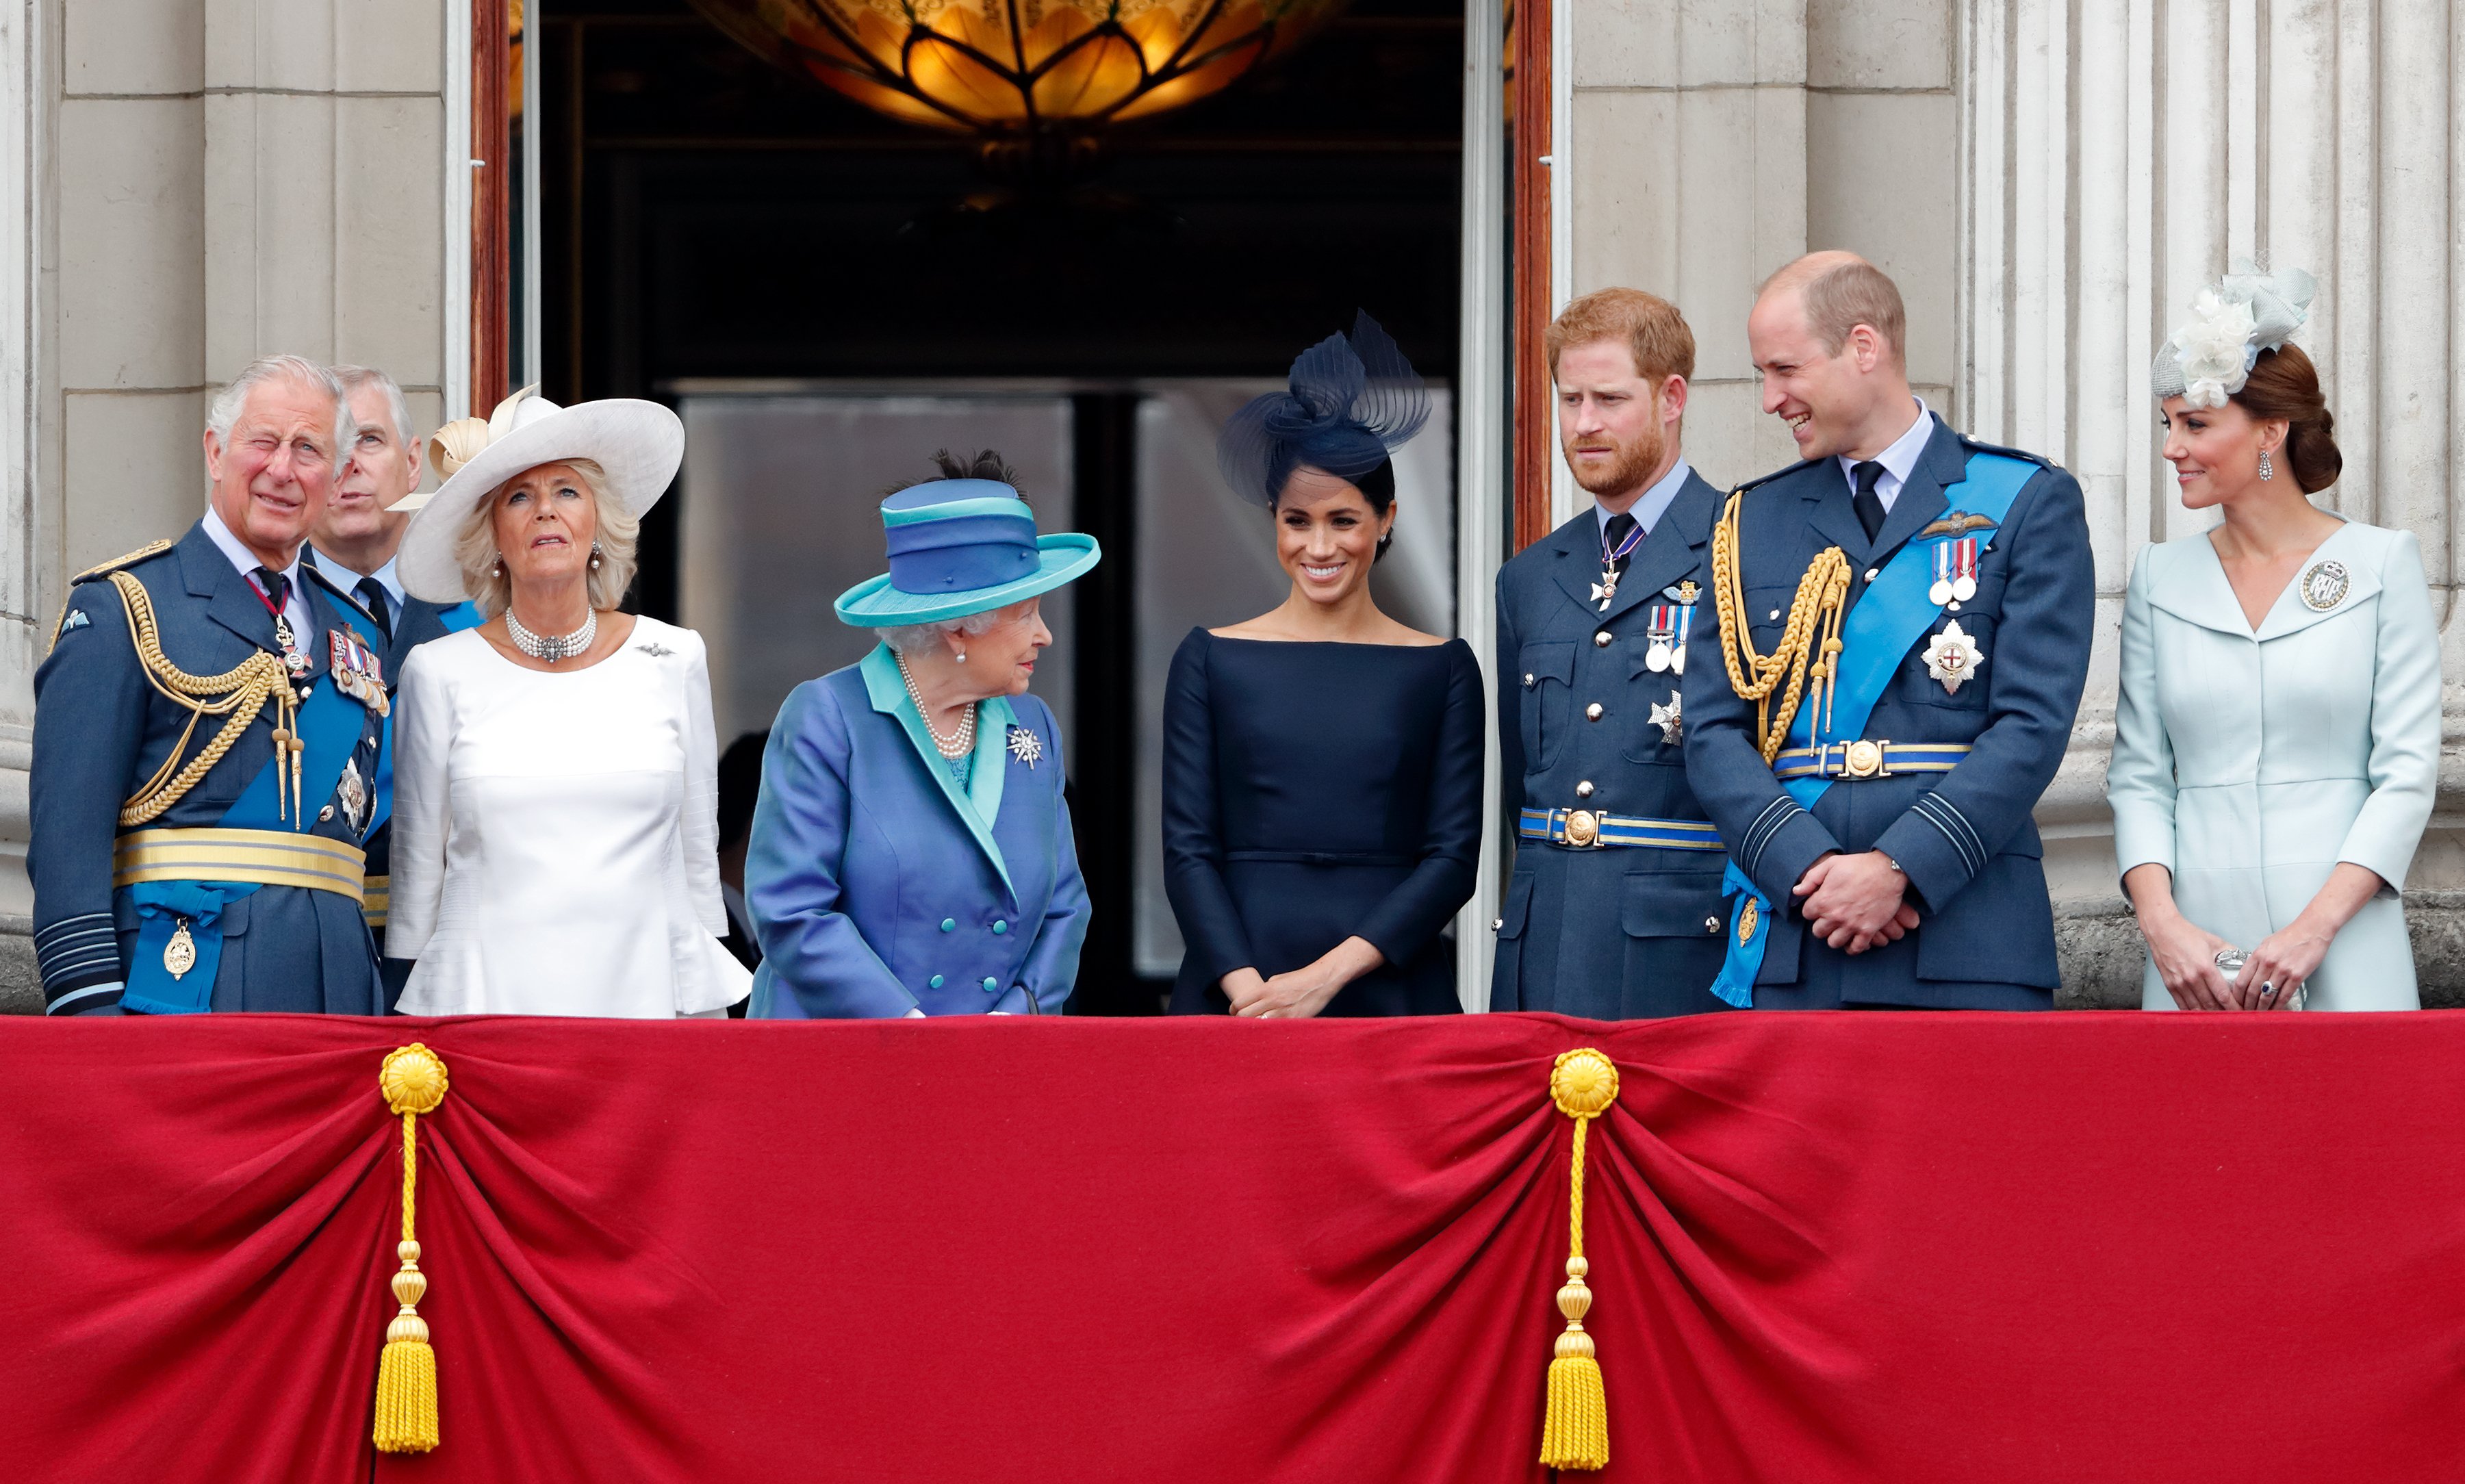 Prince Charles, Duchess Camilla, Queen Elizabeth II, Duchess Meghan, Prince Harry, Prince William and Duchess Kate attend a flypast to mark the centenary of the Royal Air Force on July 10, 2018 in London, UK. England.  |  Source: Getty Images